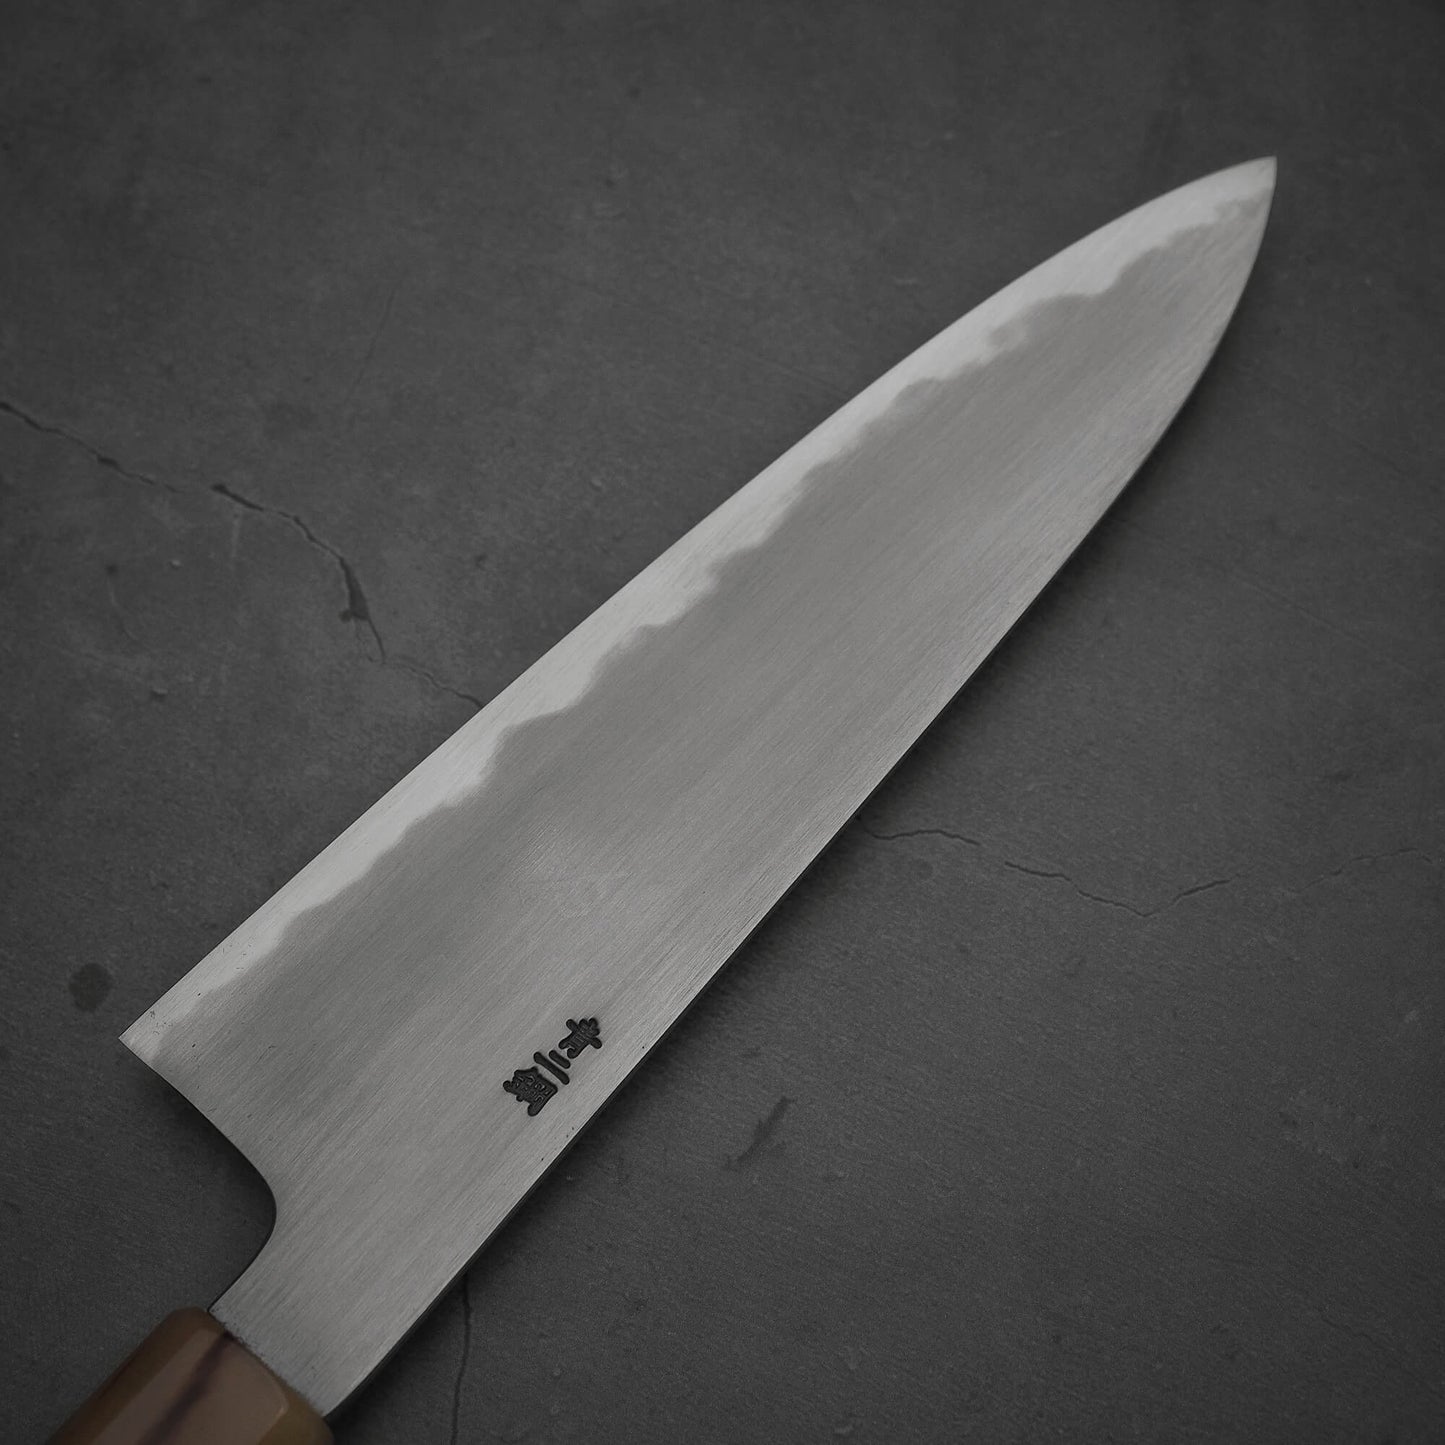 Top view of the left side of the blade of Nakagawa aogami#2 gyuto knife